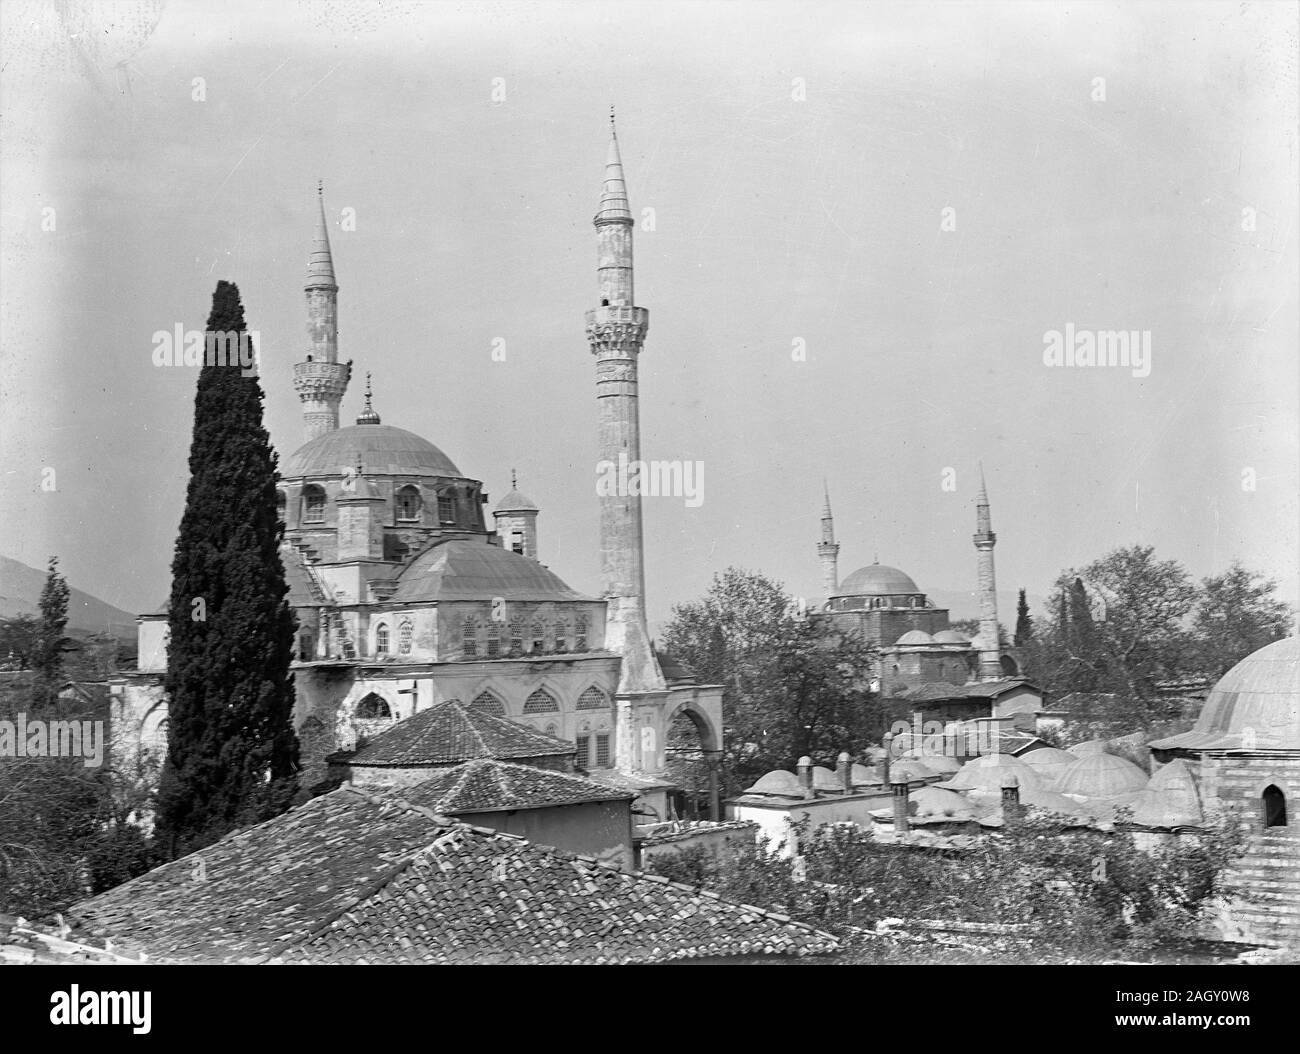 Muradiye Külliyesi mosque with Hafsa Sultan mosque in the background. Muradiye mosque was built by Mimar Sinan in the late 16. century. Manisa is located in the western part of Turkey. Photography taken in the 1910s on dry glass plate, part of the Herry W. Schaefer Ottoman collection. Stock Photo